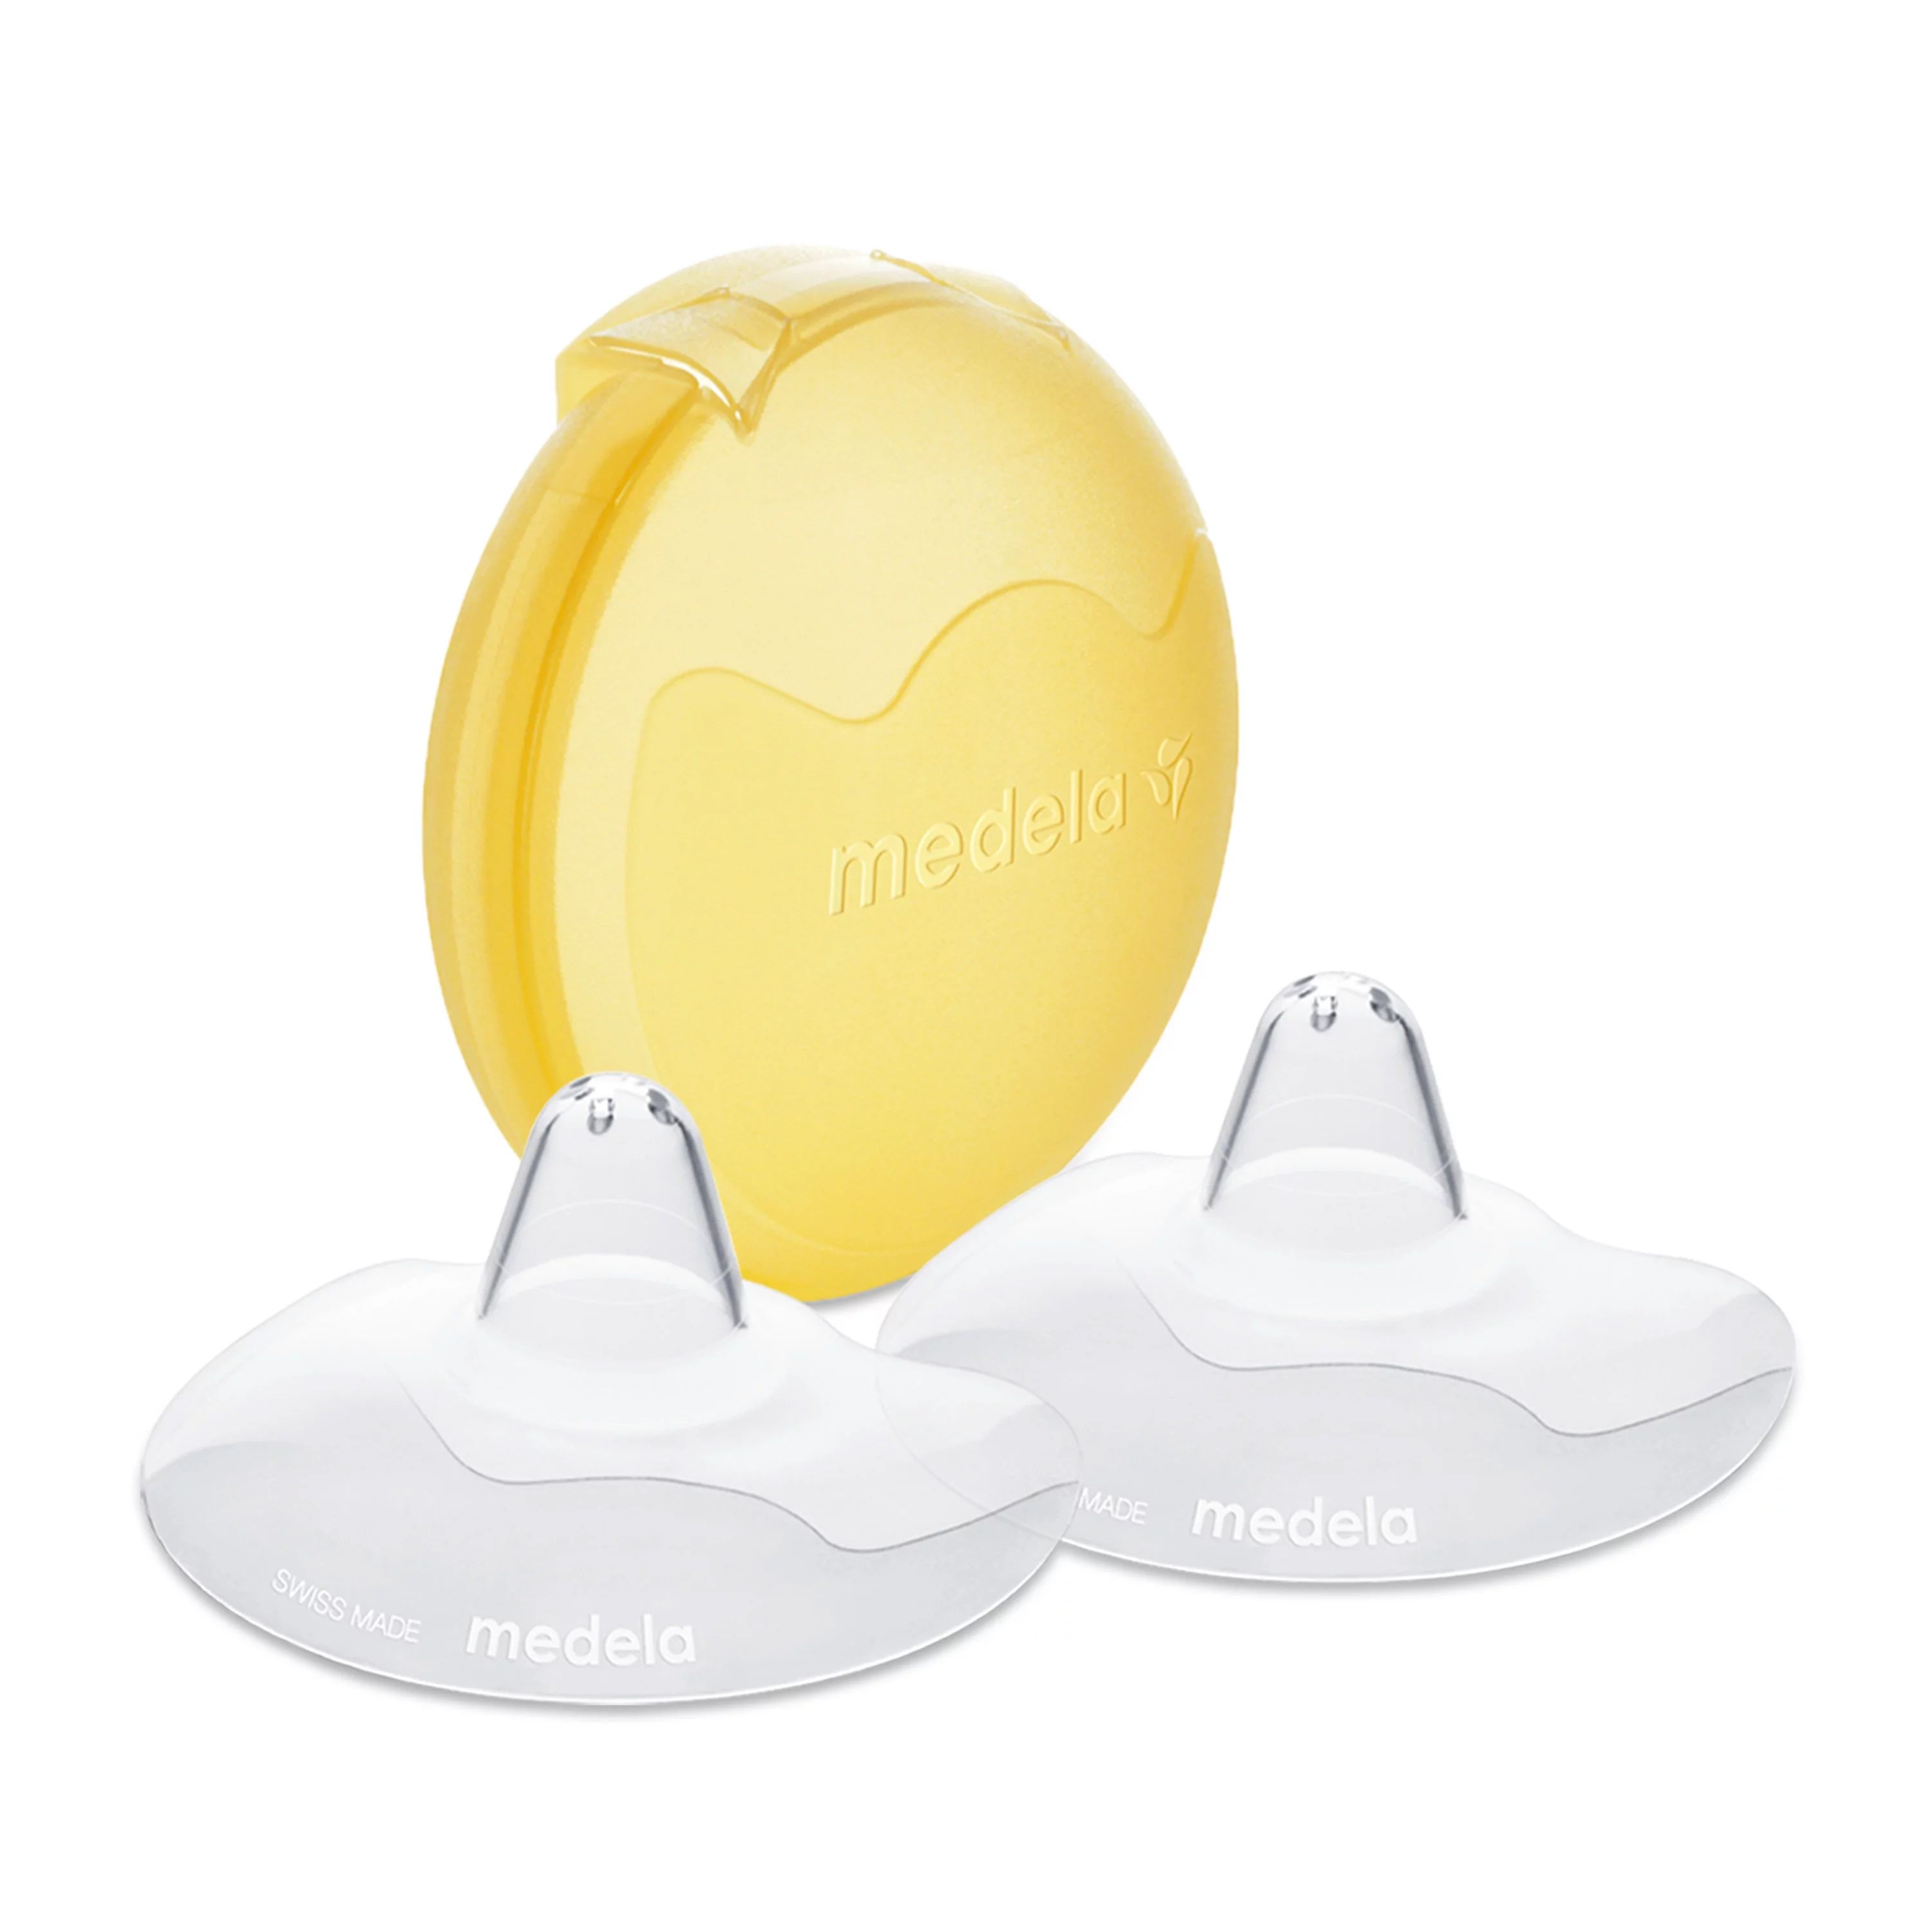 Medela Contact Nipple Shields 20mm with Case | Walmart (US)